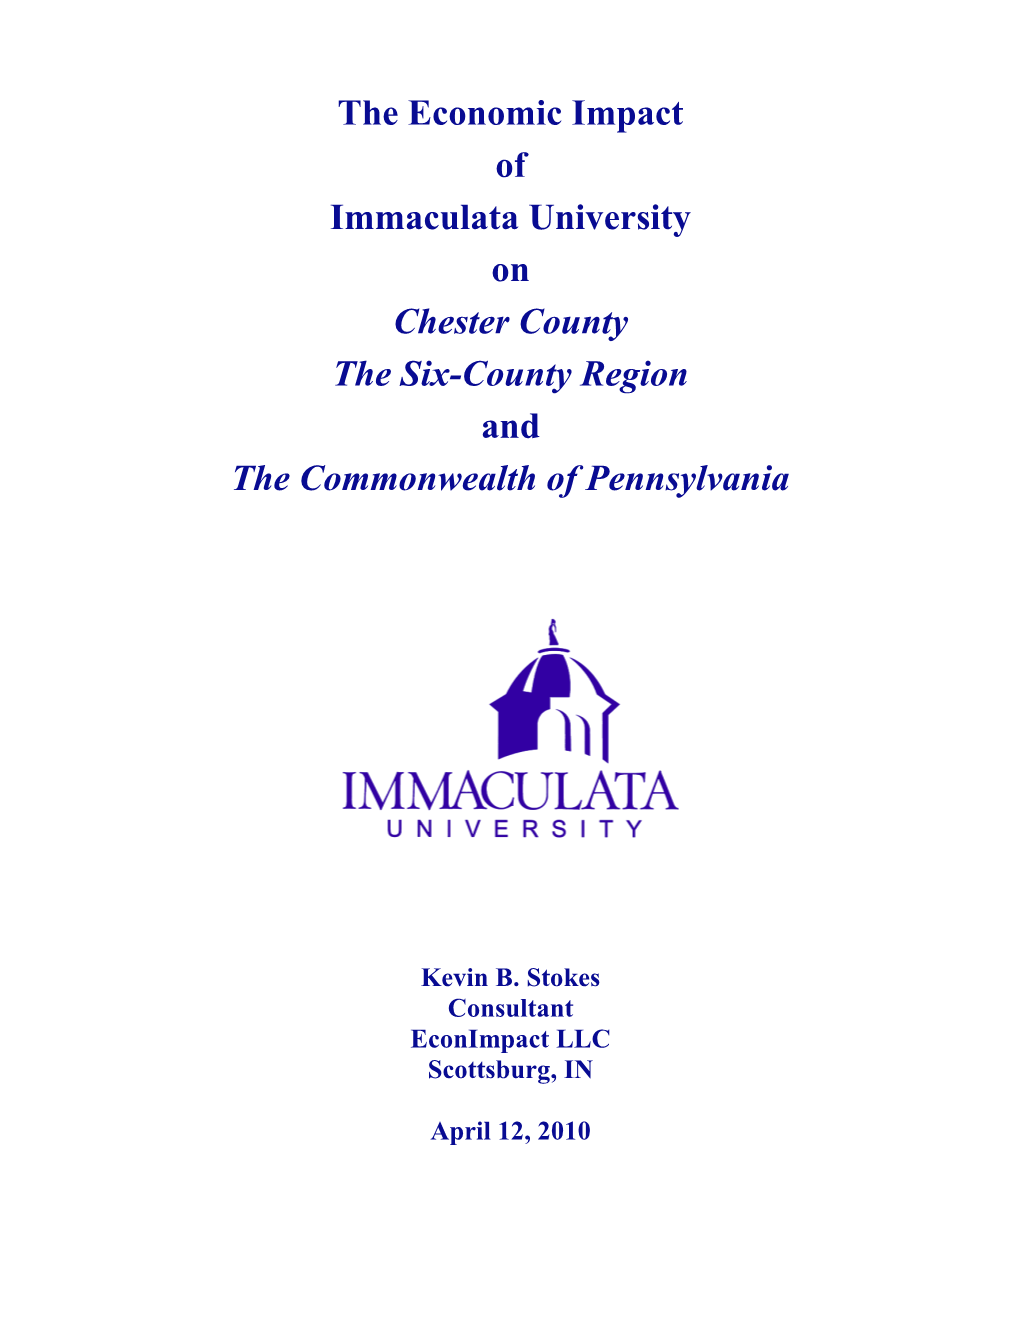 The Economic Impact of Immaculata University on Chester County the Six-County Region and the Commonwealth of Pennsylvania